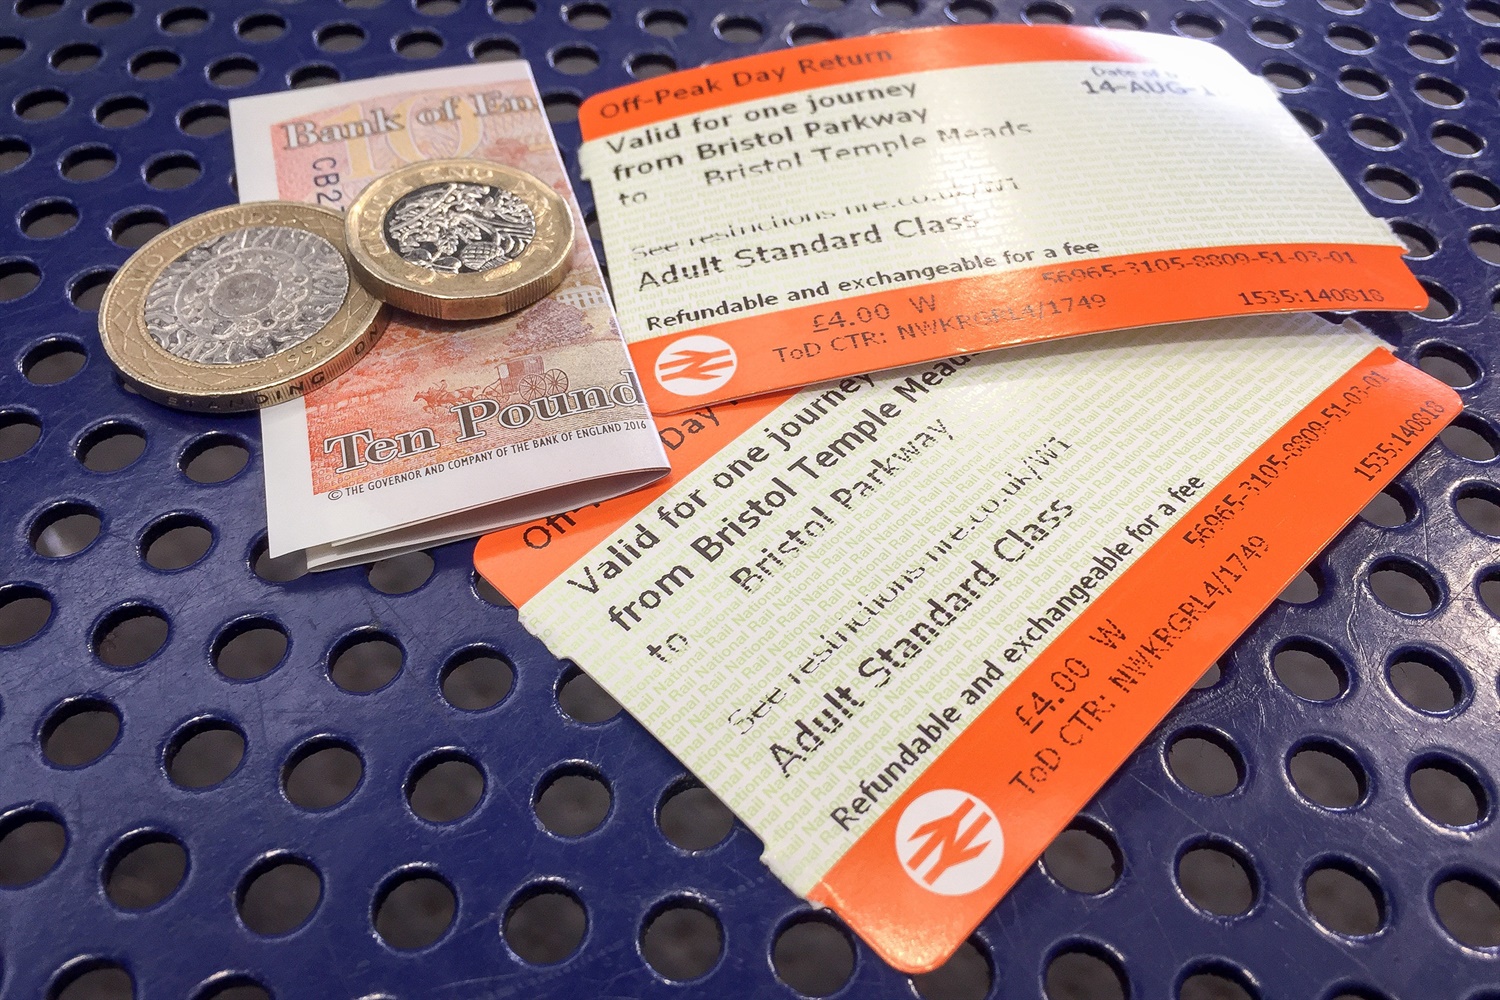 ‘Another kick in the teeth’: Rail fares to rise by 3.1% in New Year